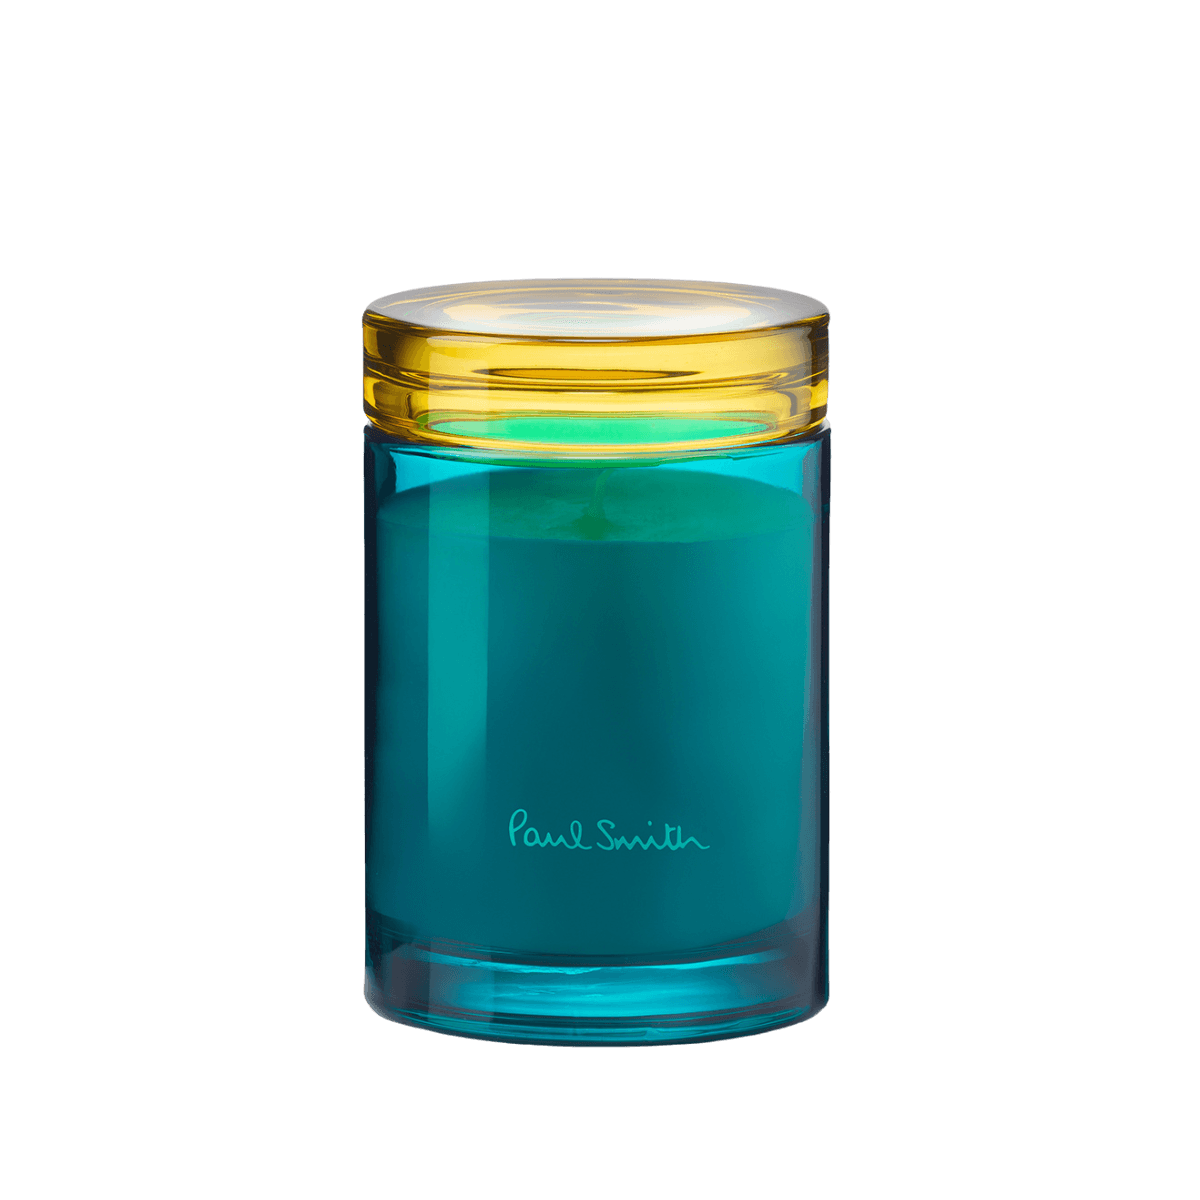 Image of Sunseeker scented candle by Paul Smith